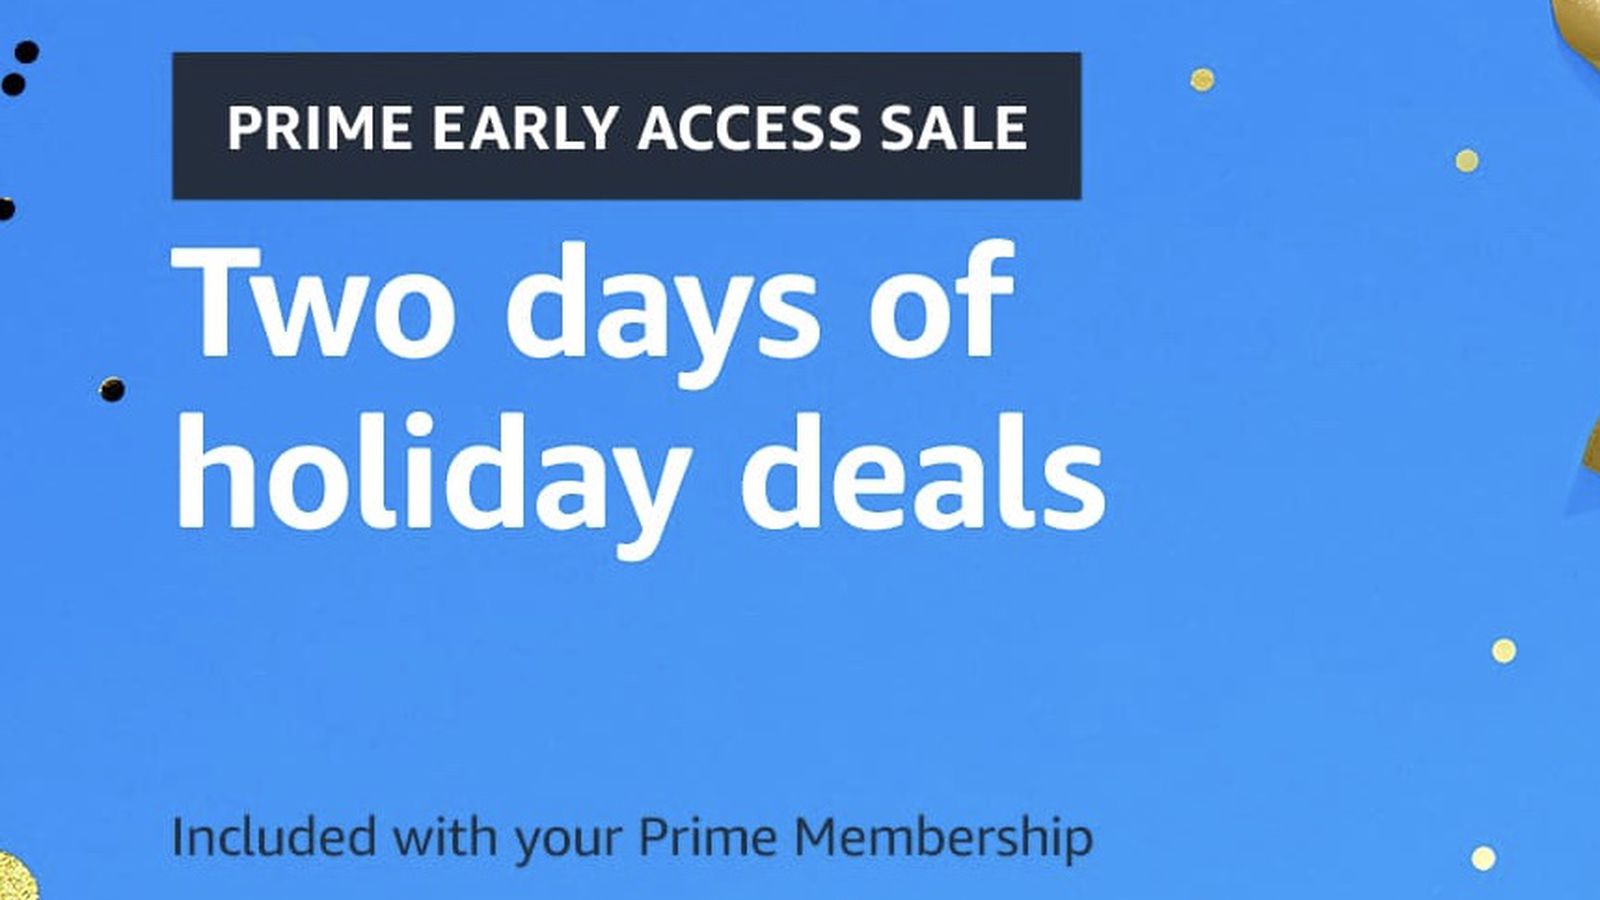 Check out these deals from the  Prime Early Access Sale.